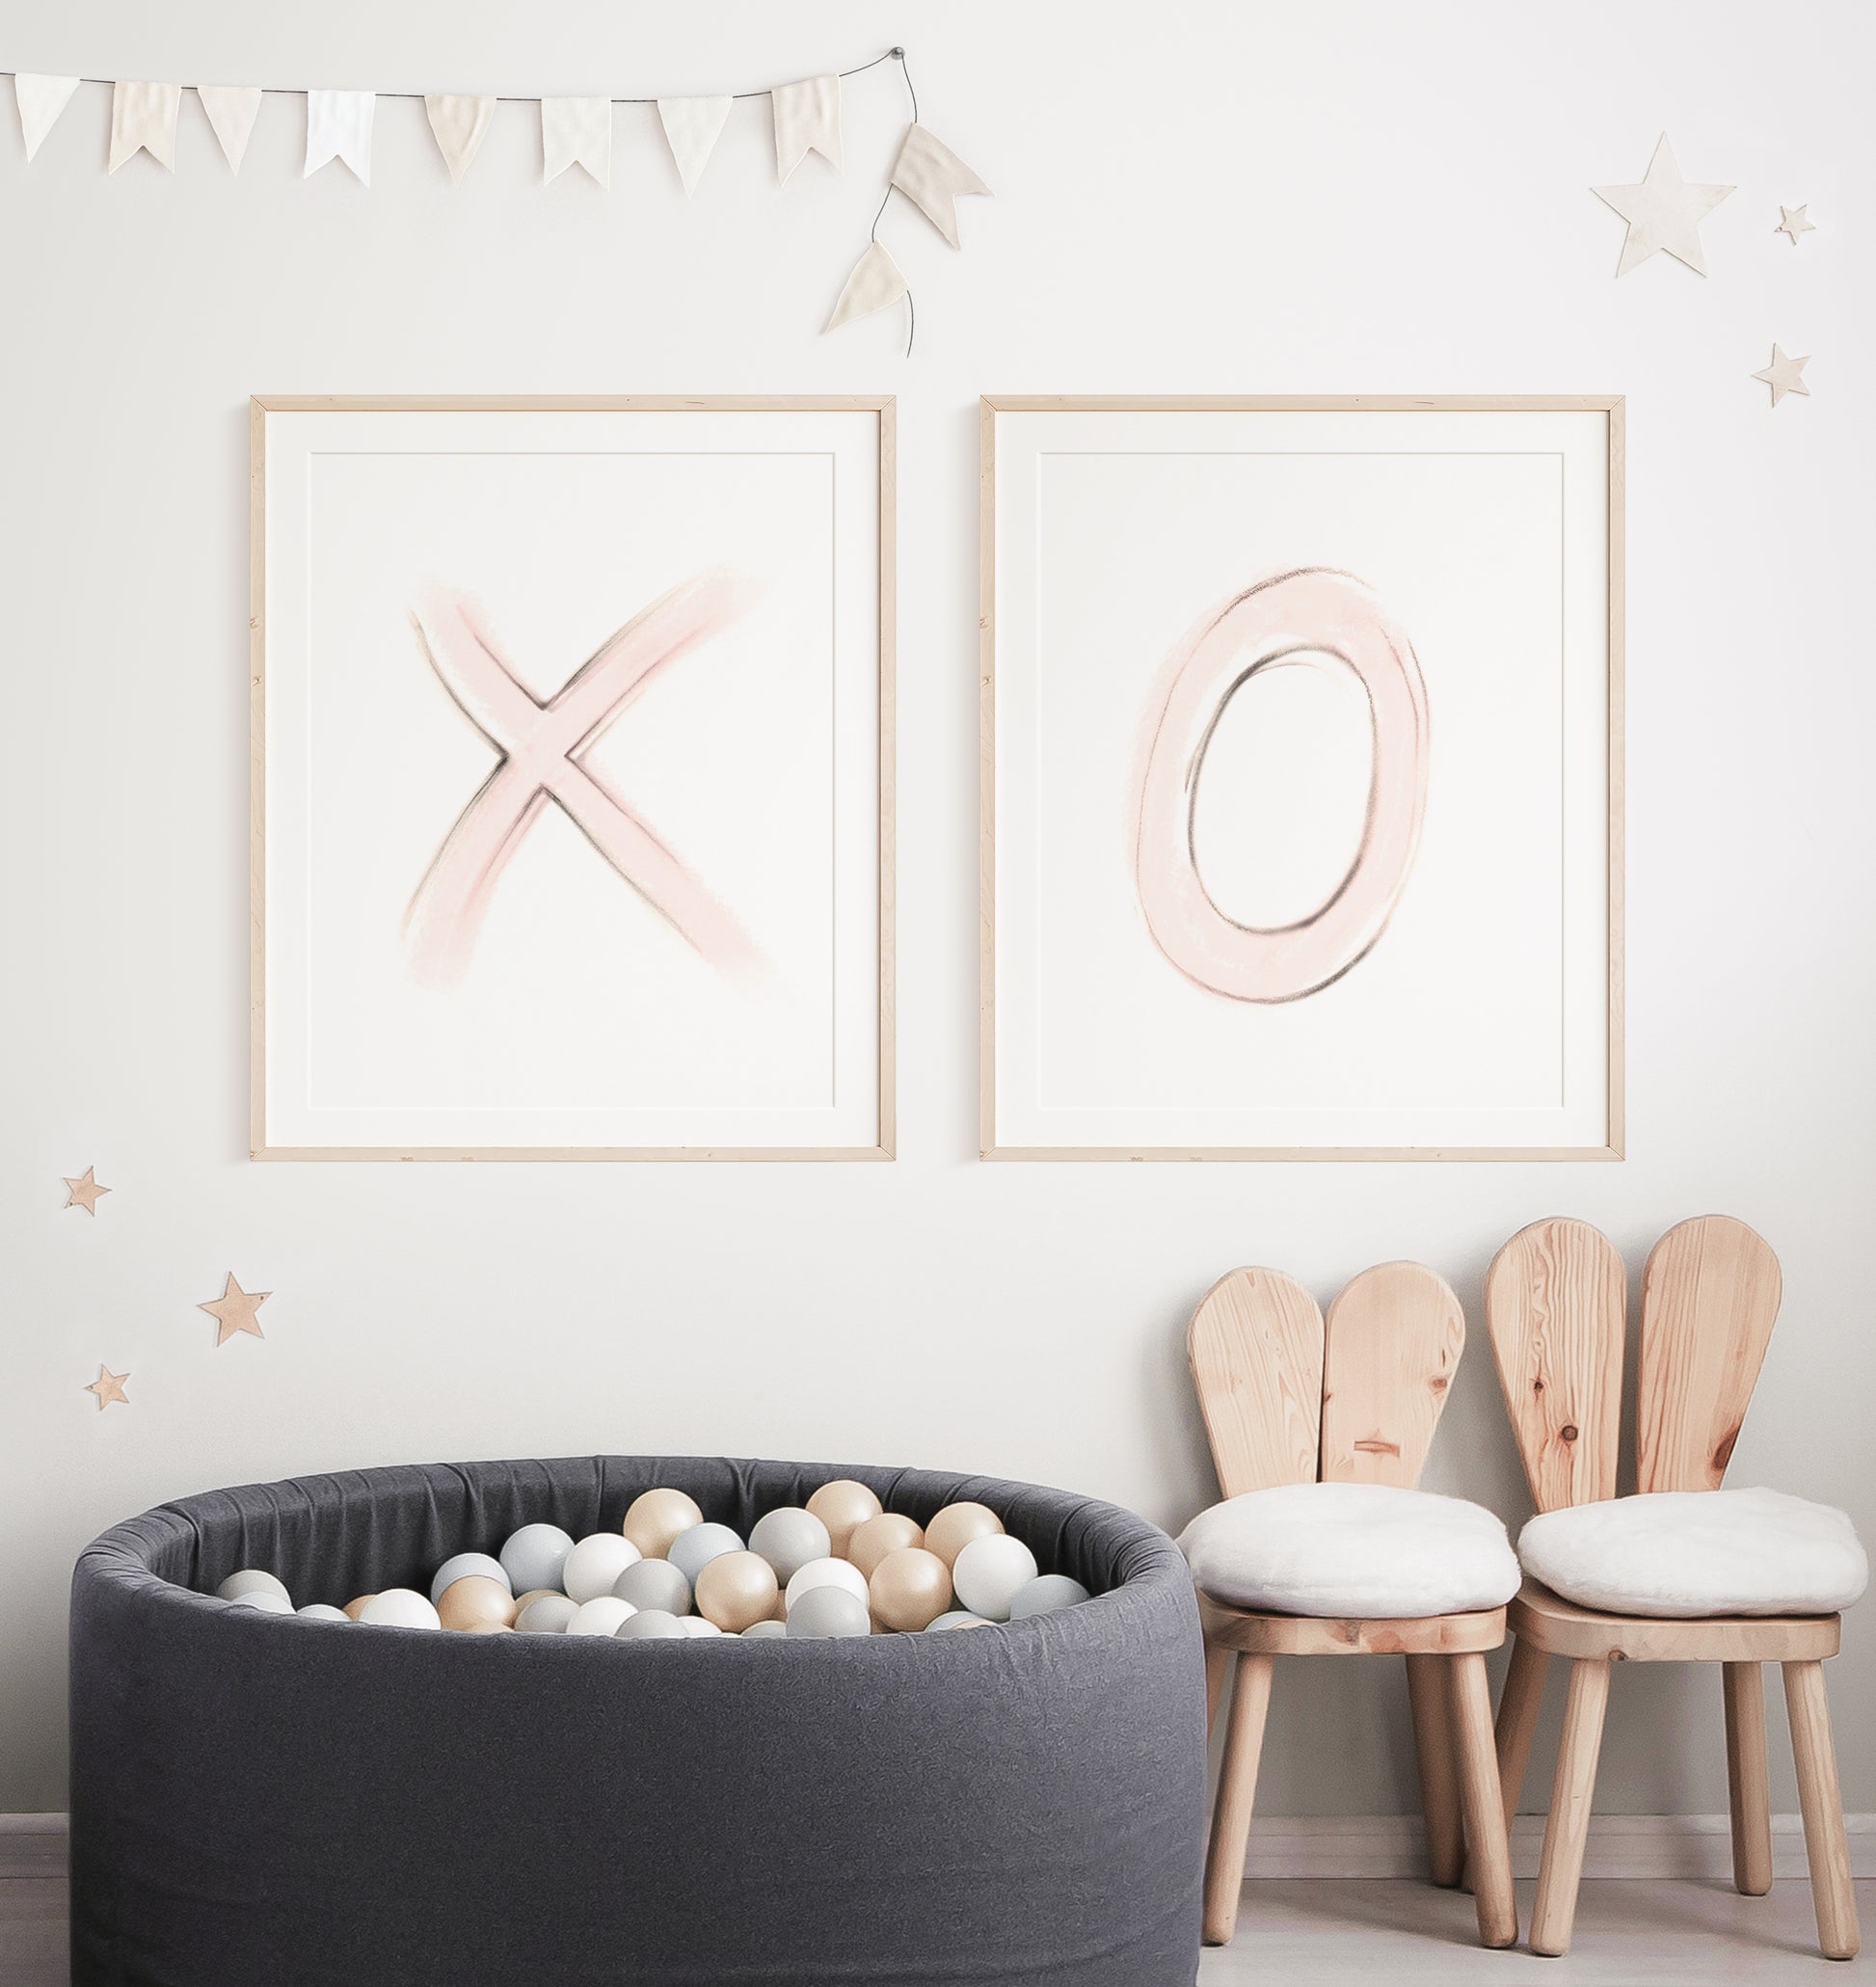 X and O drawing art prints for little girl's room. The X and O are in a sepia tone with blush pink accents - Studio Q - Art by Nicky Quartermaine Scott